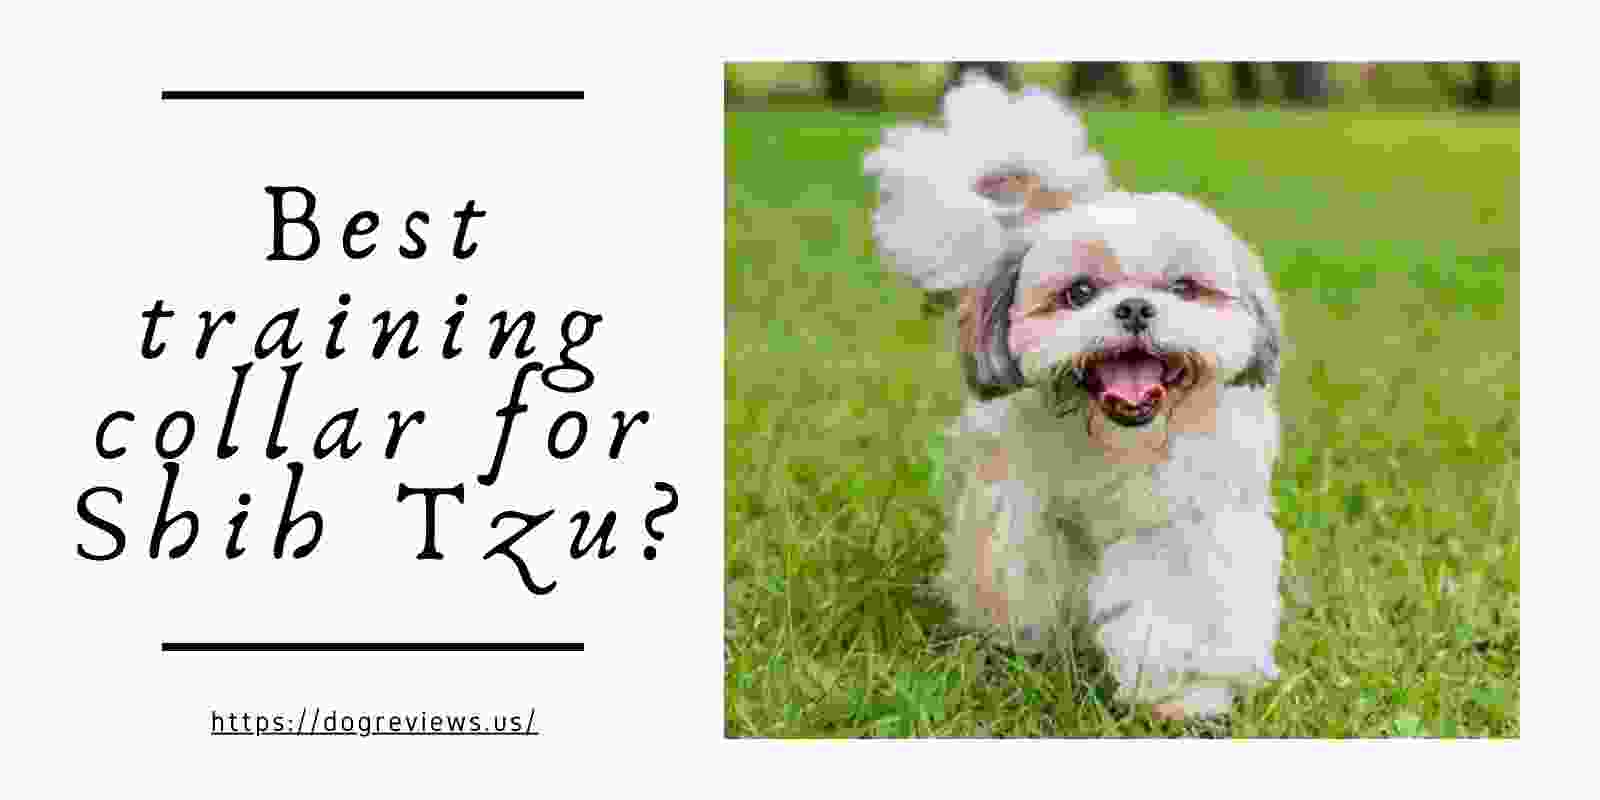 What is the best training collar for Shih Tzu?